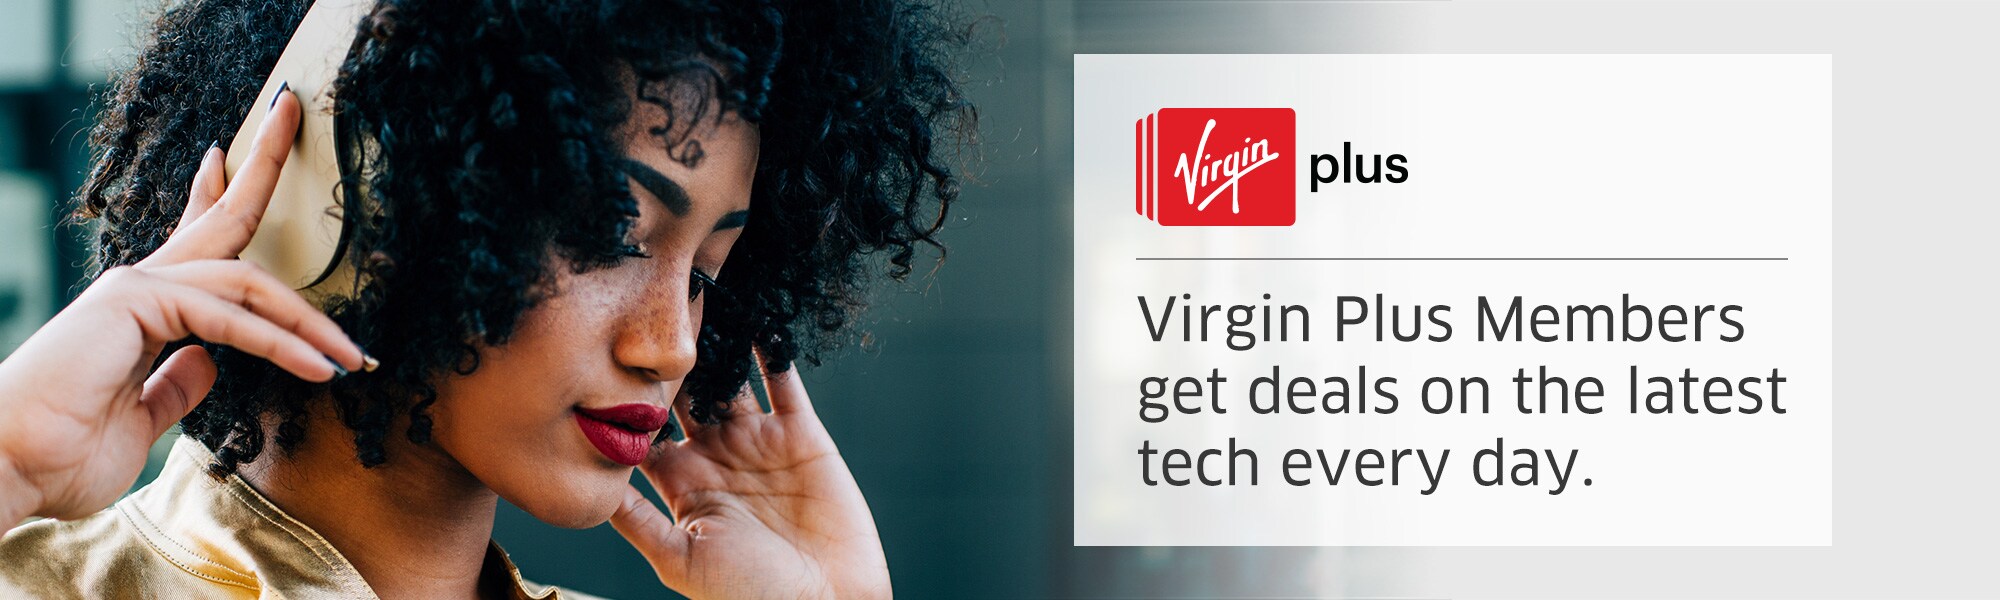 Virgin Plus Members  SAVE more every day on the latest tech